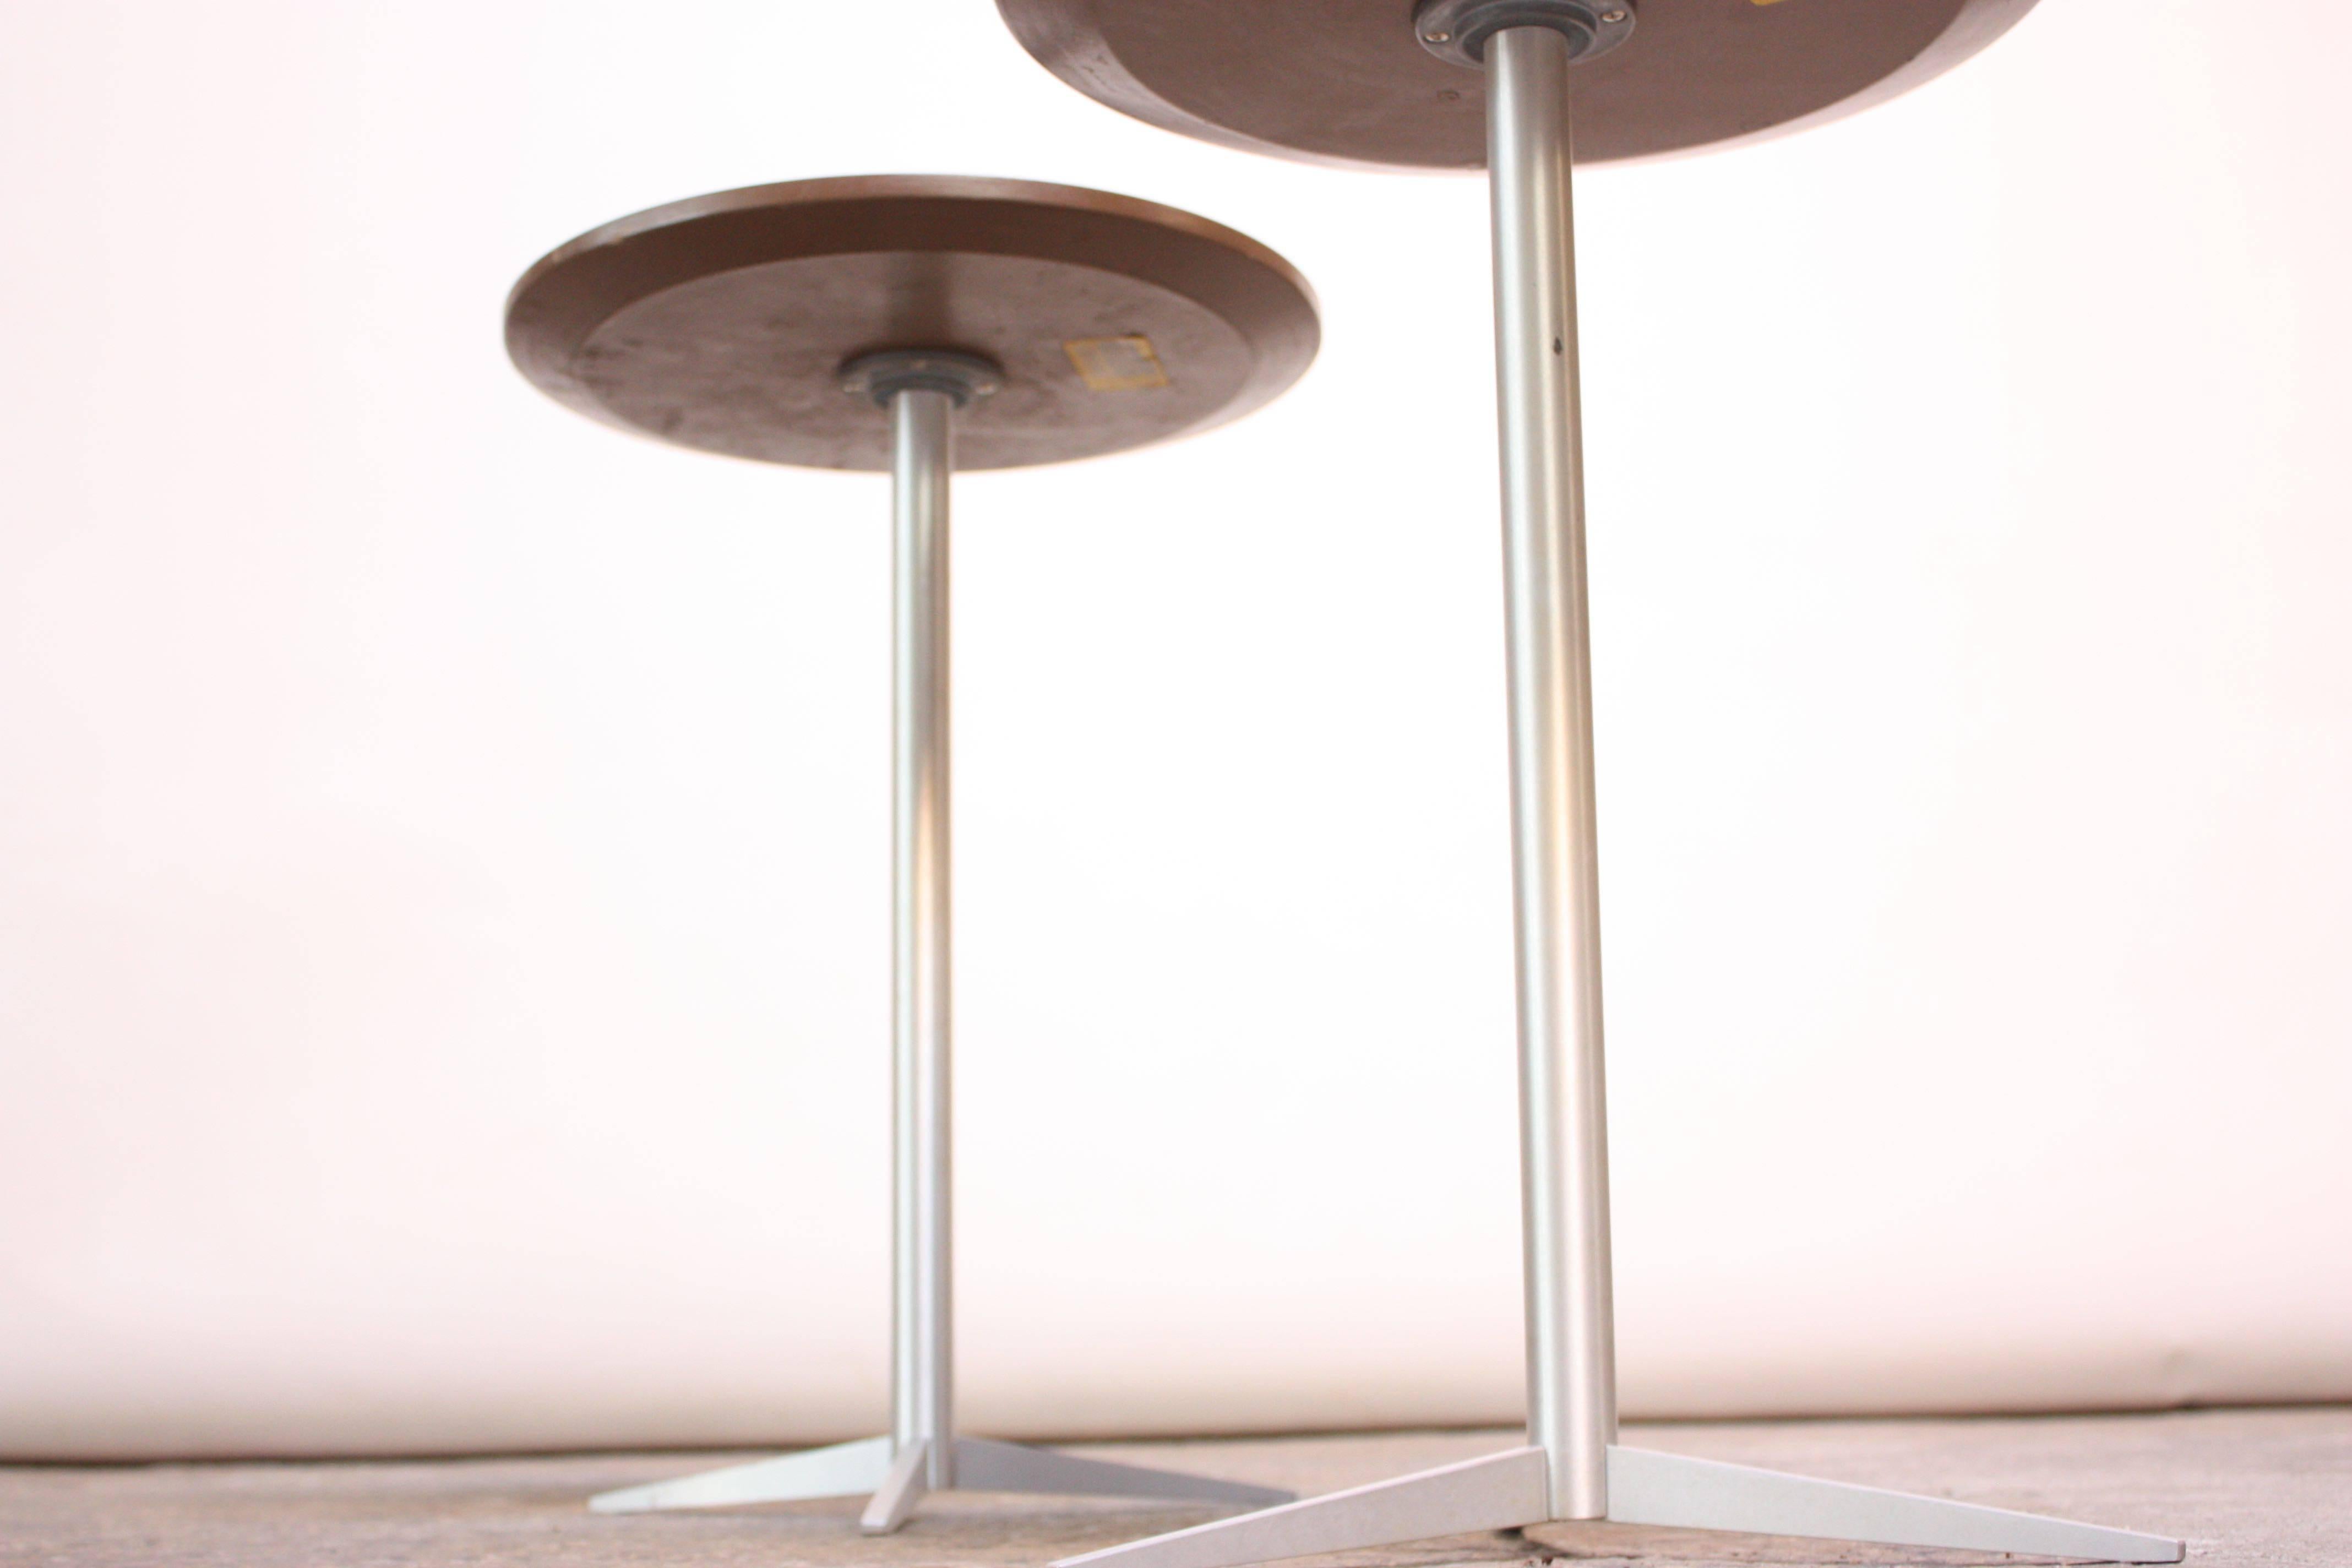 These striking Thonet side or drink tables (often mis-attributed to Paul Mccobb) feature sleek tripod bases in brushed aluminum and laminate round surfaces. The surfaces sit atop a molded plastic base which is screwed onto the aluminum post, so the